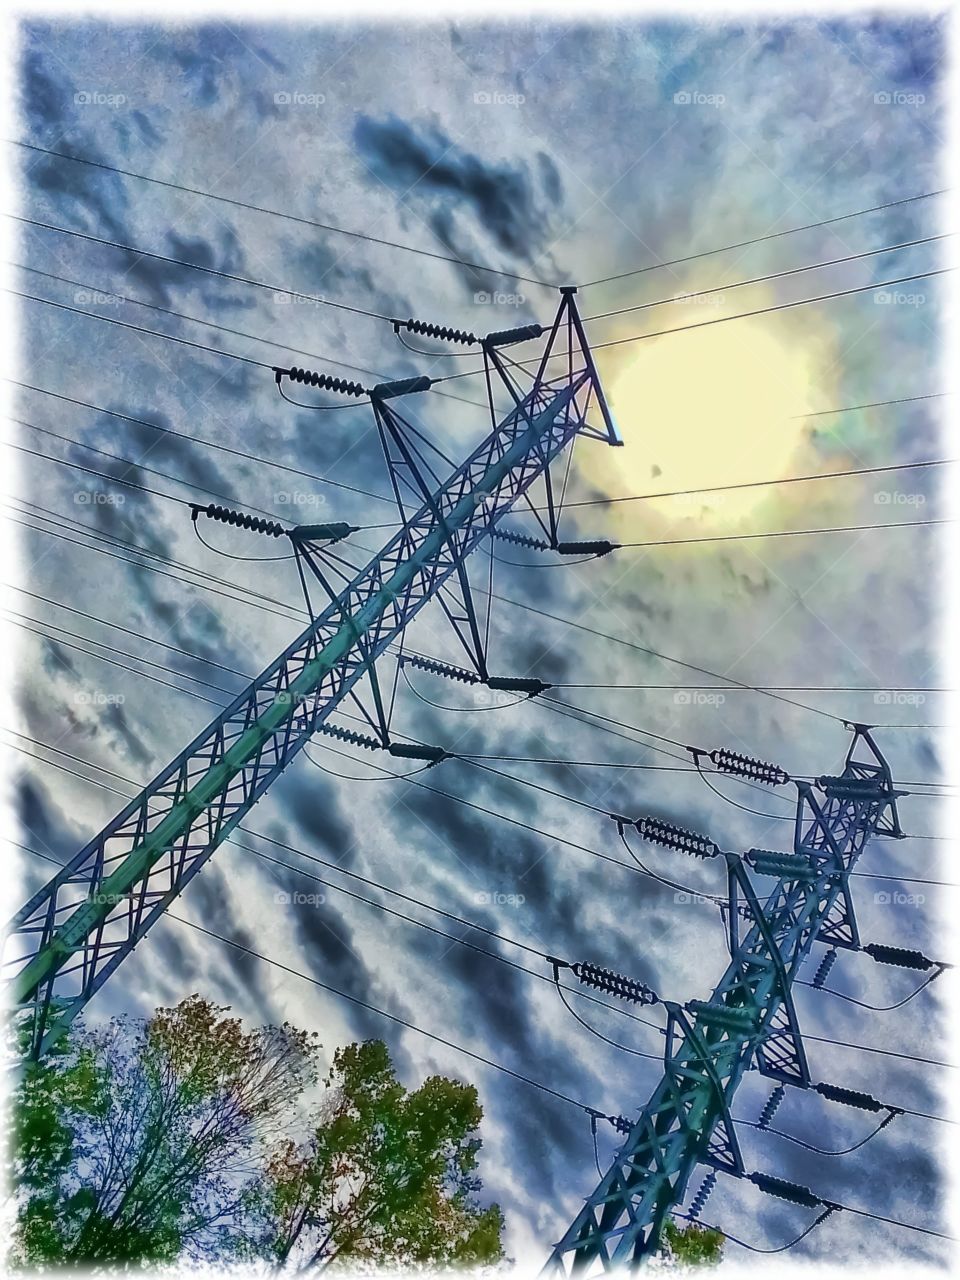 Power Line Towers. Power line towers on a partly cloudy day.